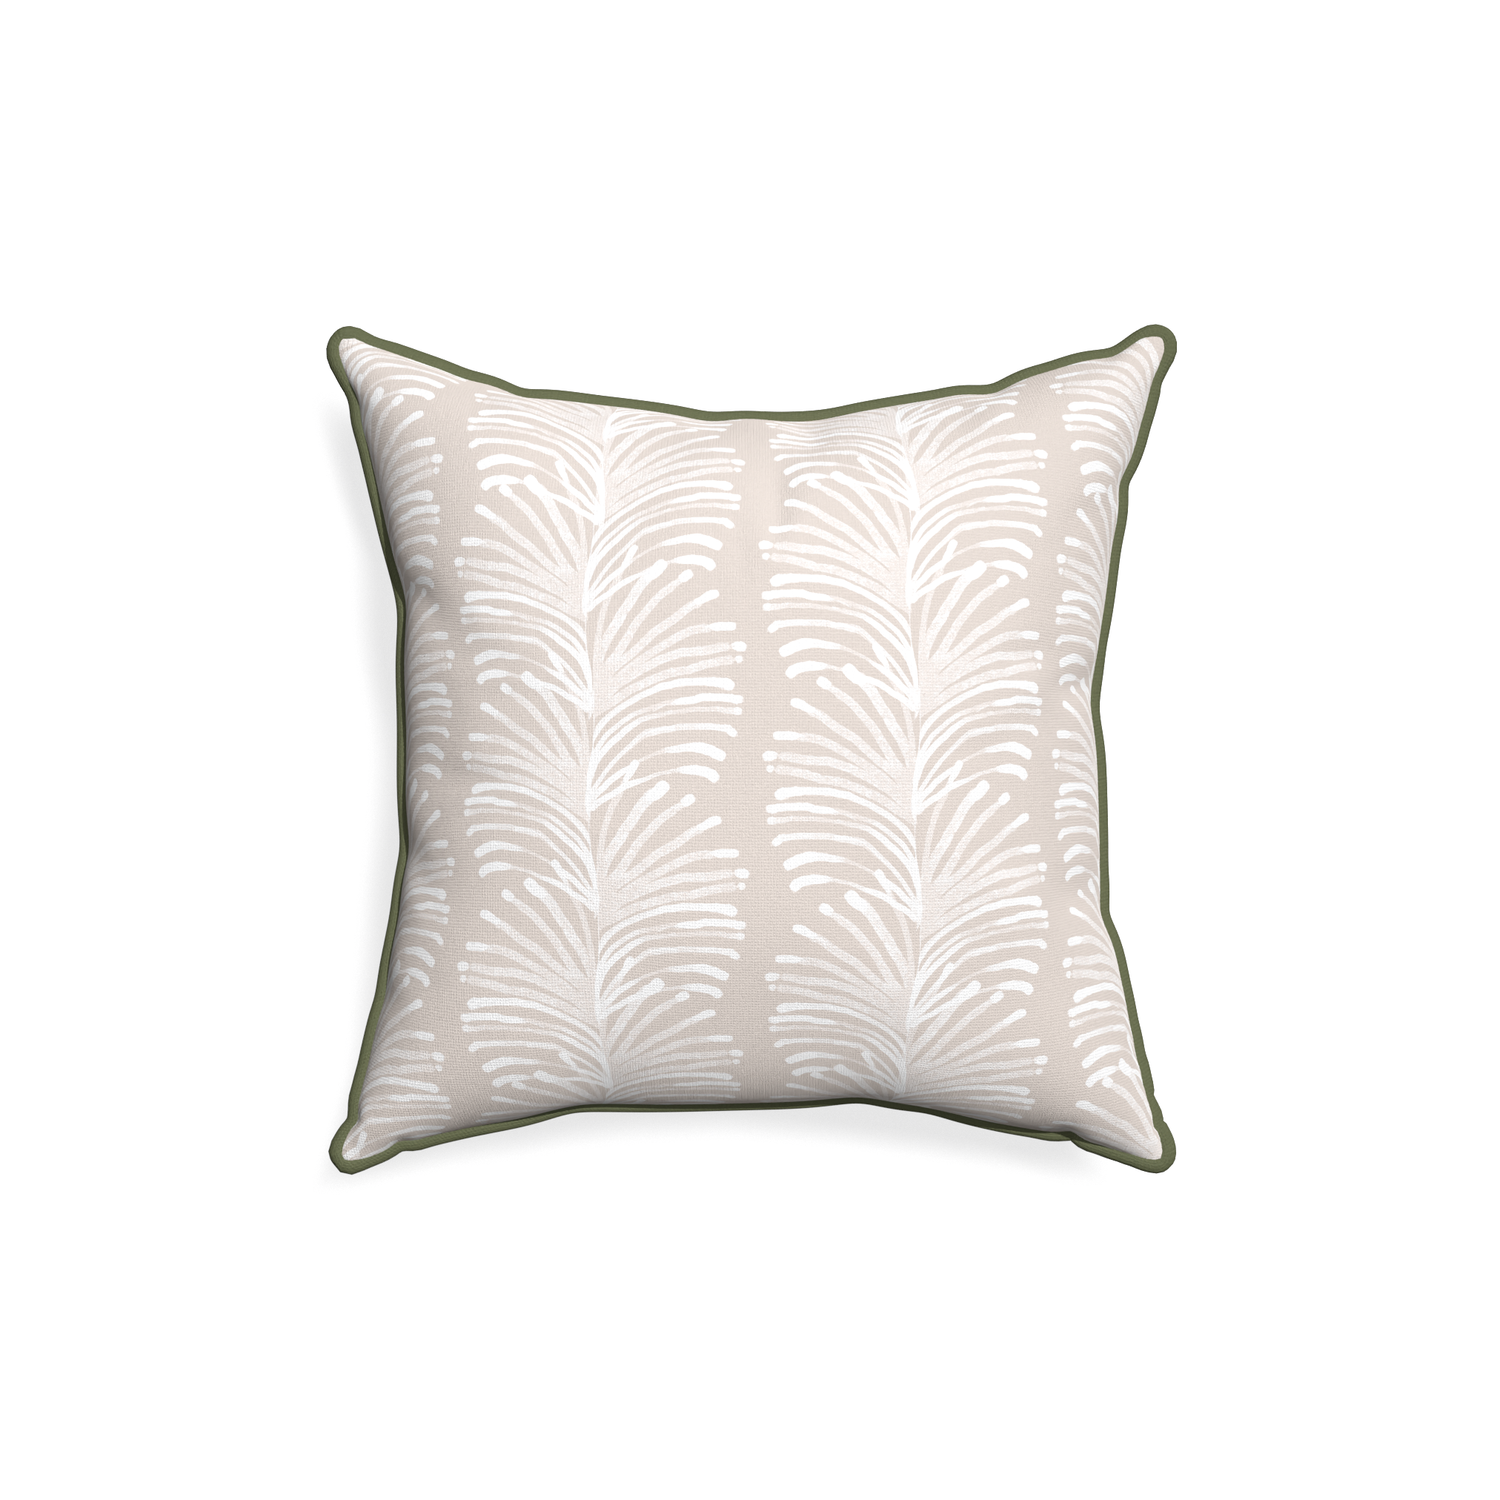 18-square emma sand custom sand colored botanical stripepillow with f piping on white background